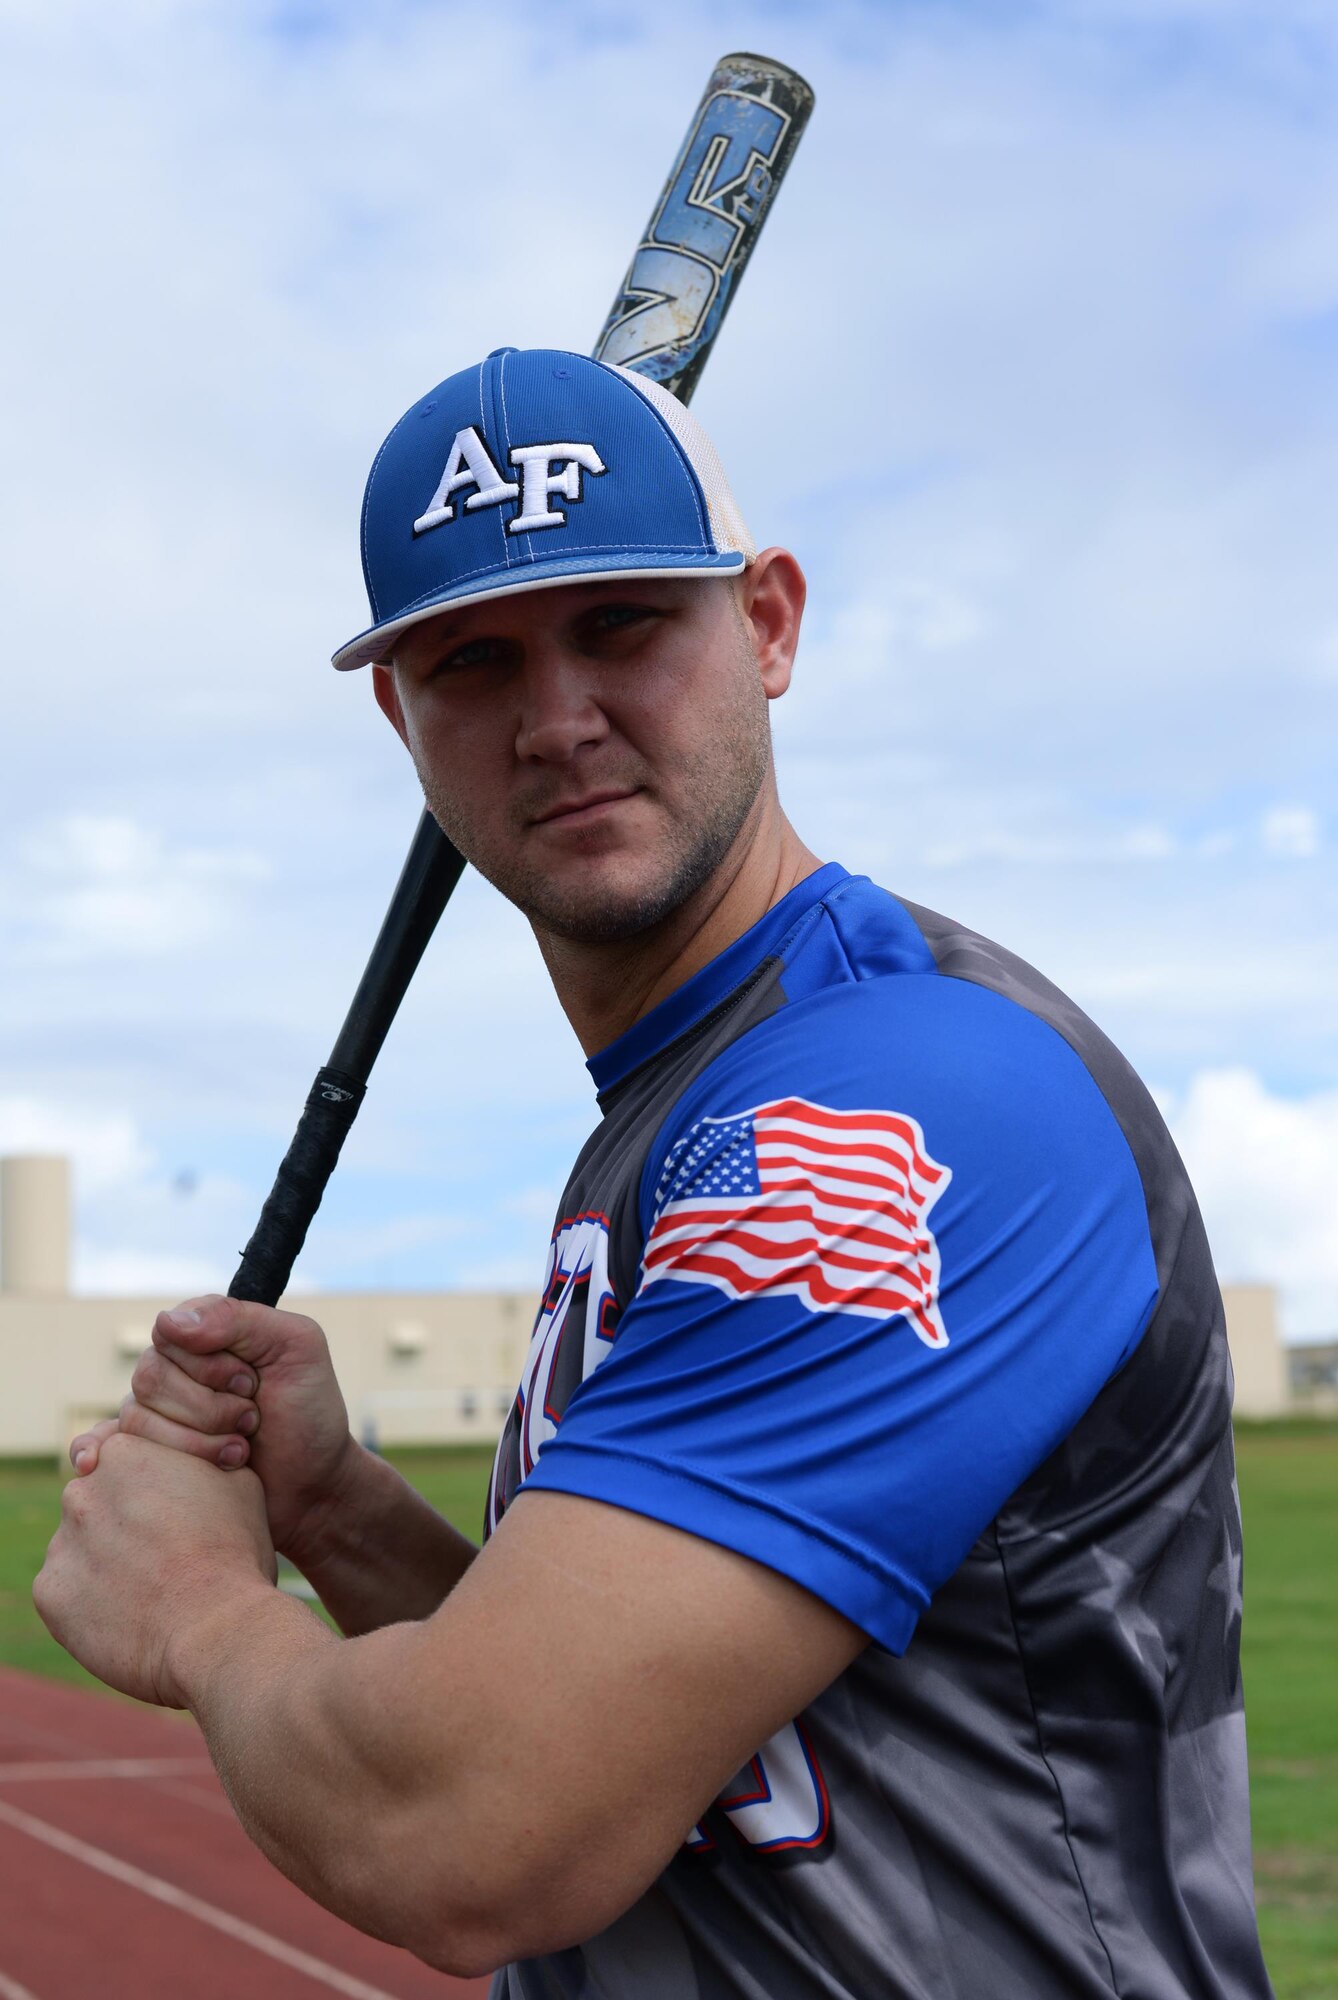 Staff Sgt. Garrett Gapp, 36th Maintenance Squadron, NCO in charge of maintenance flight, poses for a photo Oct. 31, 2016 at Andersen Air Force Base, Guam. Gapp was selected as a member of the All-Air Force Men’s Slow Pitch Softball Team this year. (U.S. Air Force photo by Senior Airman Cierra Presentado/Released)